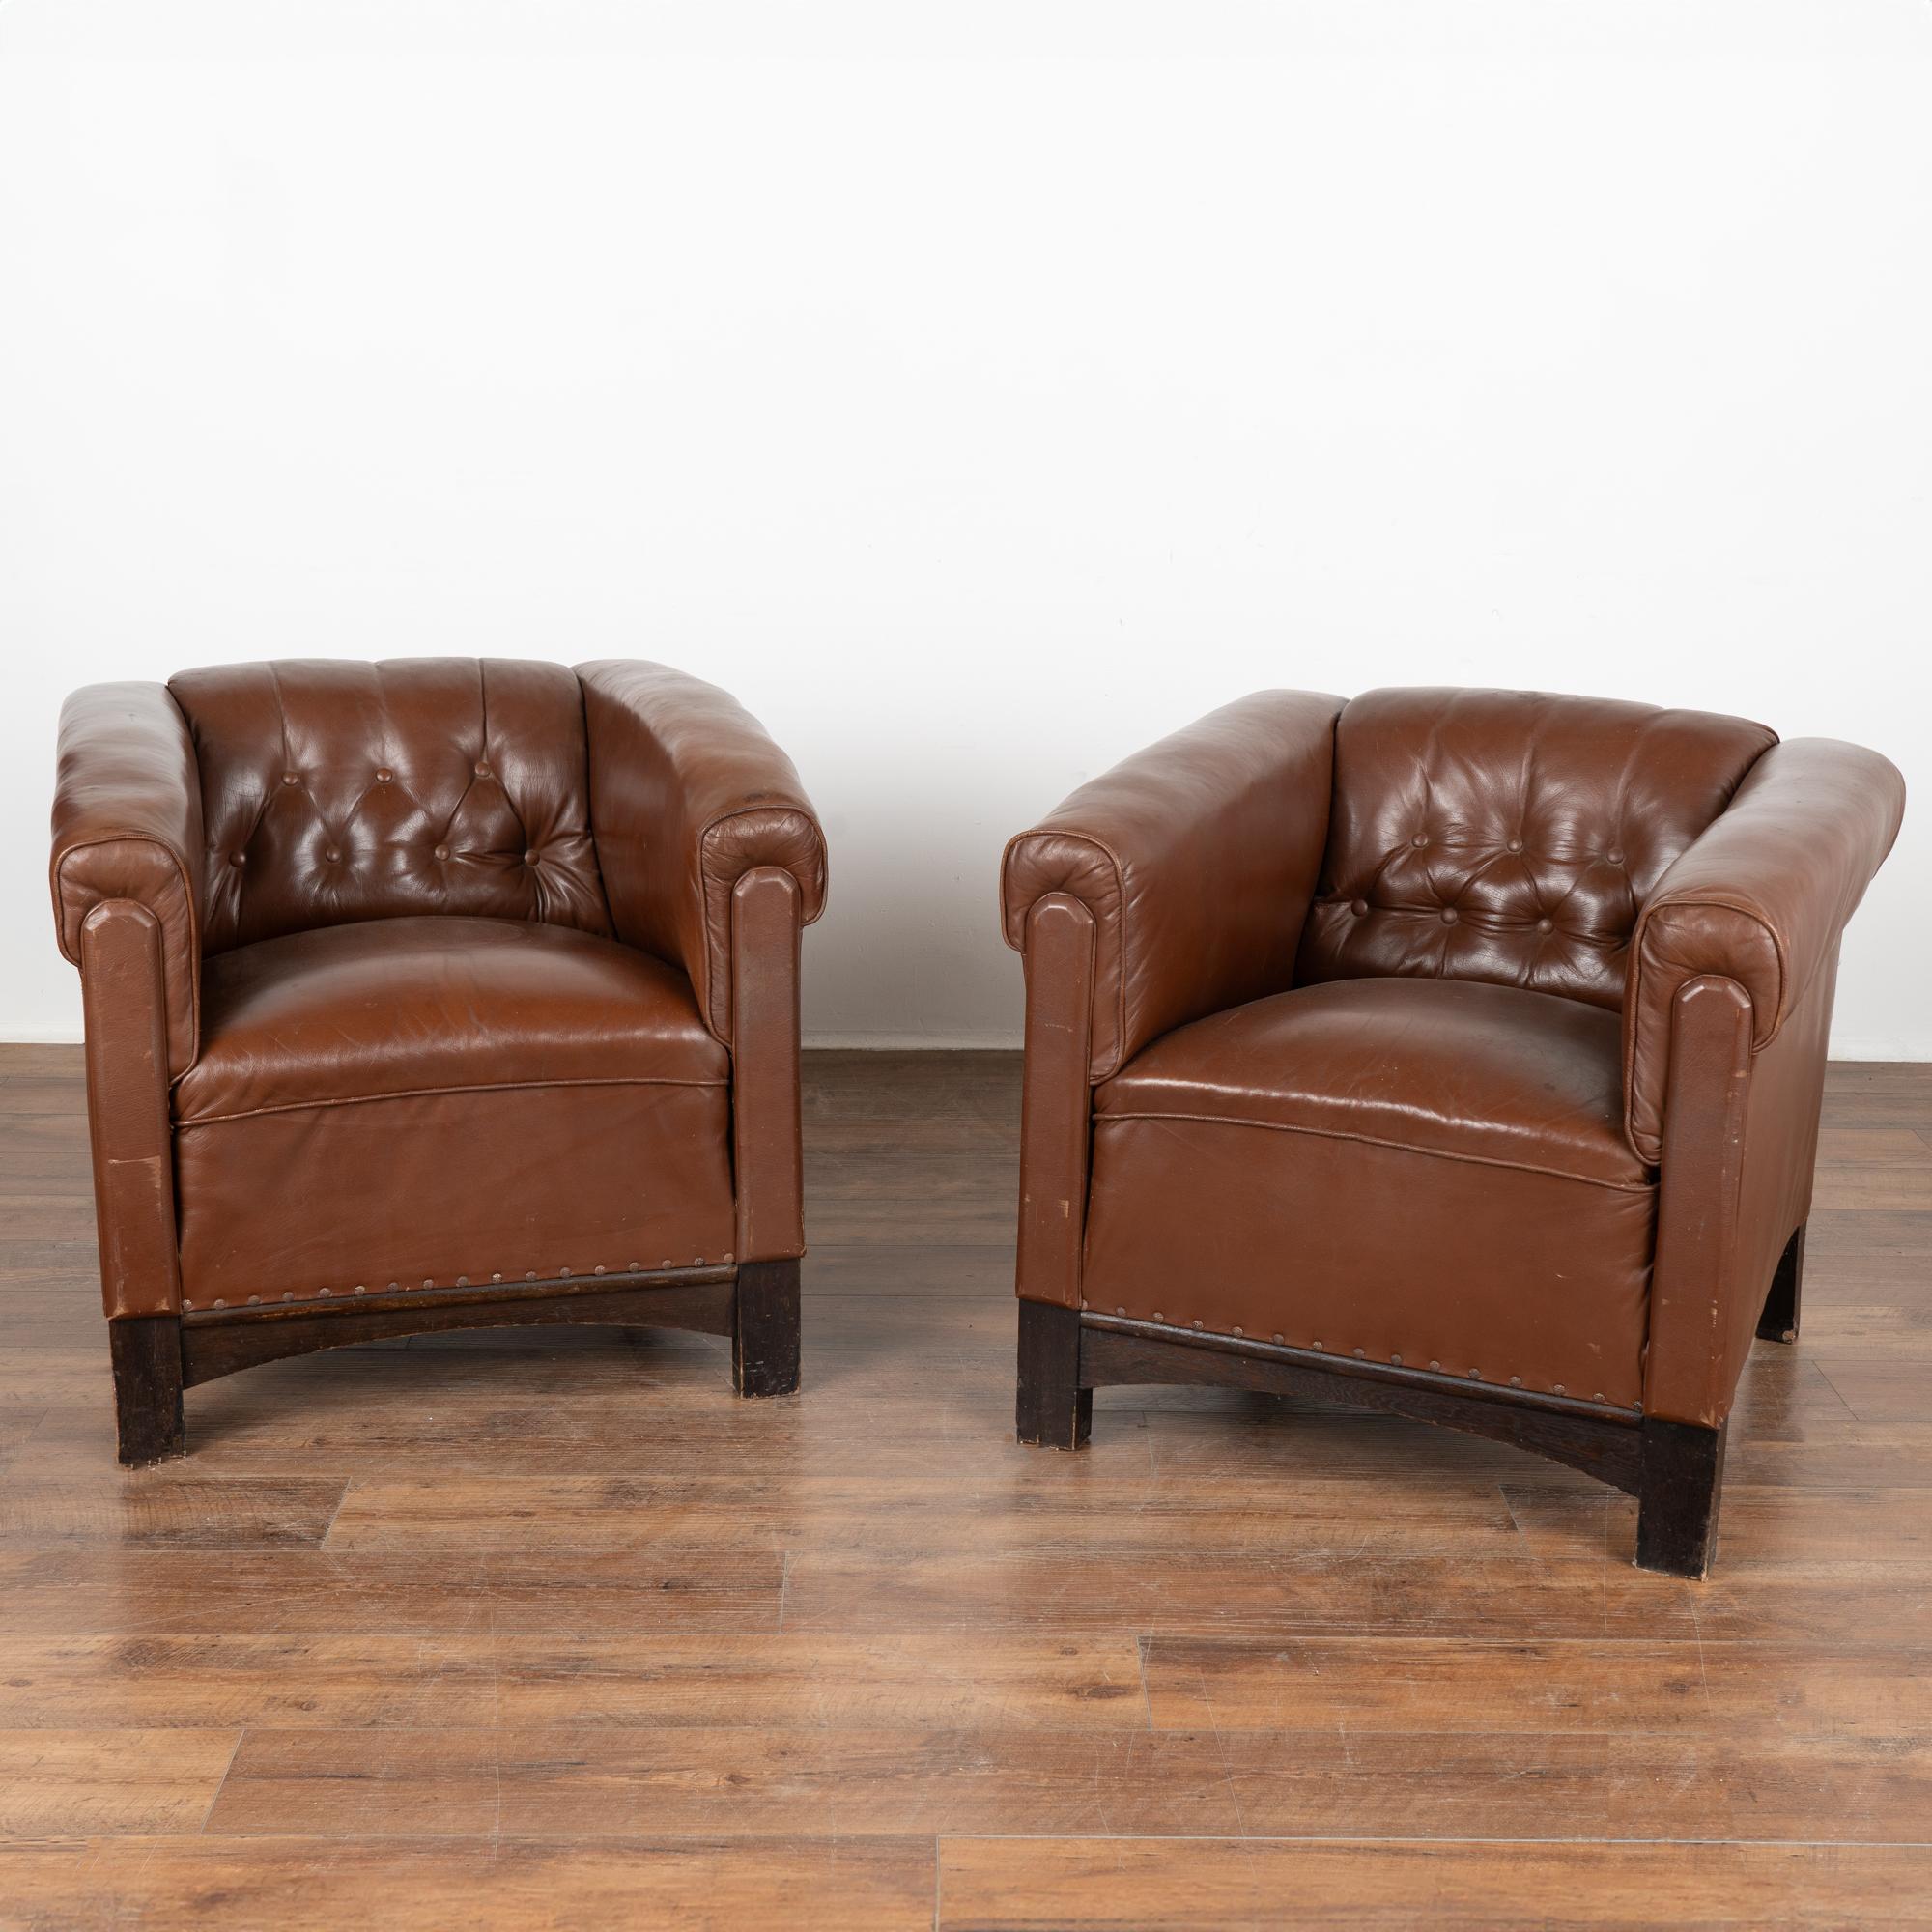 Danish Set of 3, Vintage Brown Leather Sofa and Pair of Club Chairs, Denmark circa 1960 For Sale